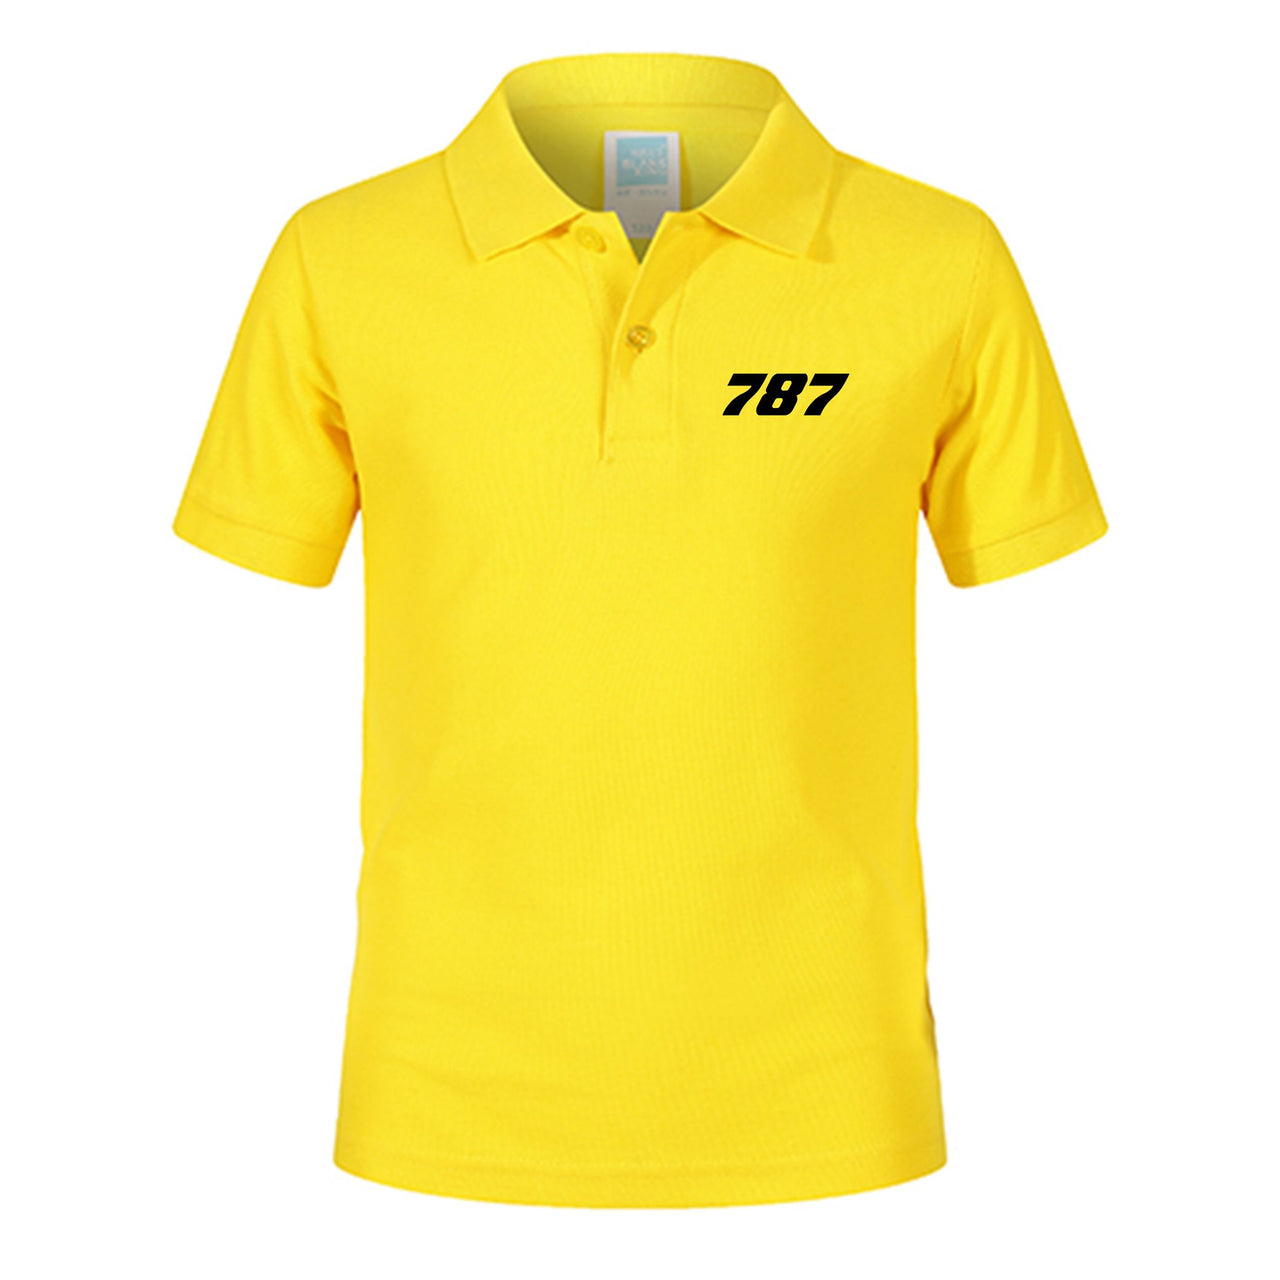 787 Flat Text Designed Children Polo T-Shirts